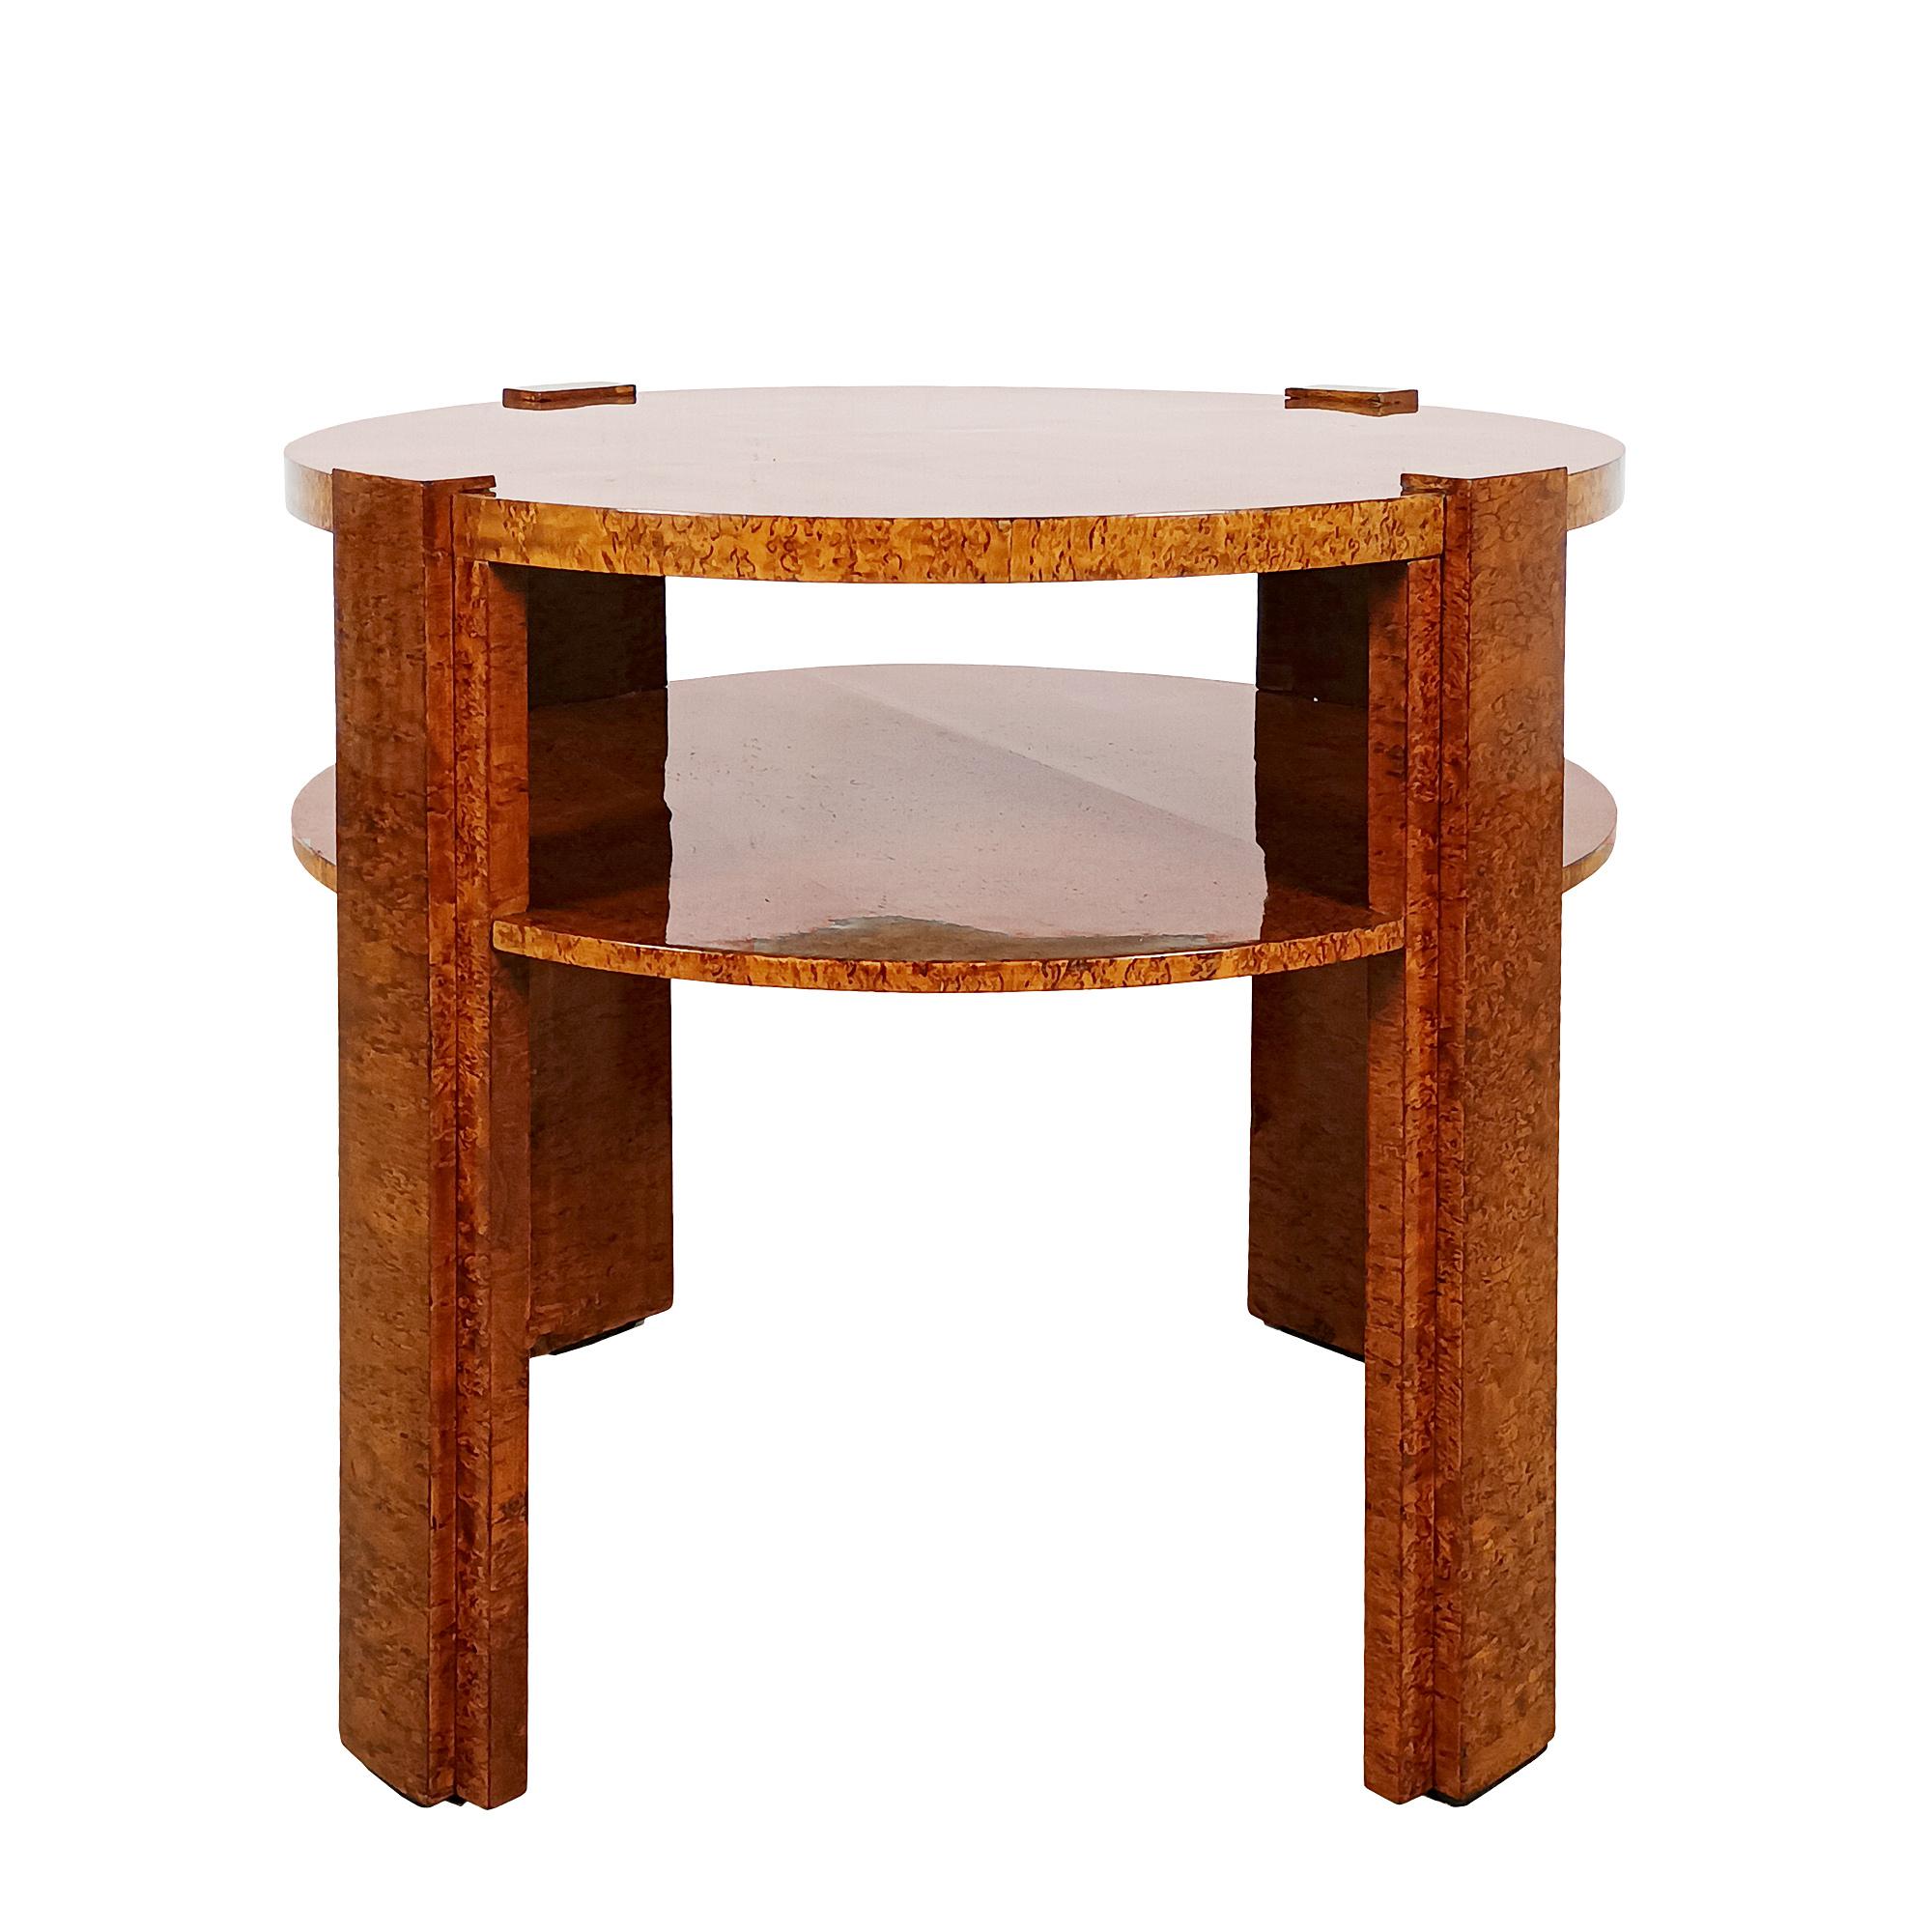 Art deco round side table with 4 cubist-style stands turning over the top. Solid wood, fully veneered with birch. French polish.
France circa 1930

Dimensions
cm Diam 65,50/68 (with stands) x 56,50/57 (stands)
inches Diam 26.18/26.77 (with stands) x